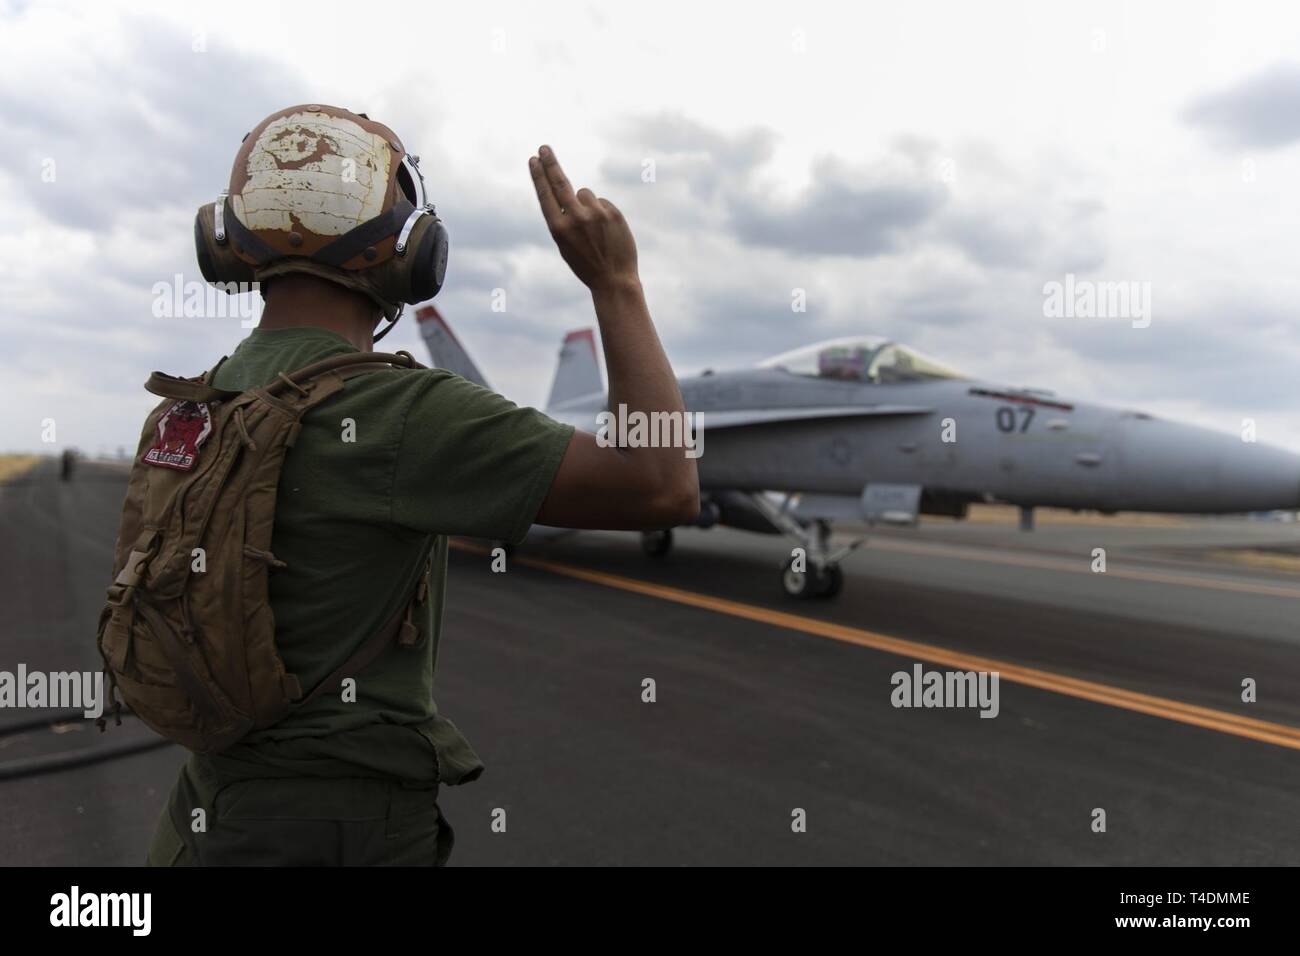 U.S. Marine Corps Lance Cpl. Daniel Vasquez refuels an F/A-18C Hornet with Marine Fighter Attack Squadron (VMFA) 232 at Clark Air Base, Philippines, April 3, 2019 during Exercise Balikatan. Balikatan is an annual exercise between the U.S. and the Philippines and comes from a Tagalog phrase meaning 'shoulder-to-shoulder,' representing the partnership between the two countries. The exercise promotes regional security and humanitarian efforts for U.S. allies and partners. Vasquez, a Fontana, California. native, is an aviation mechanic with VMFA-232. Stock Photo